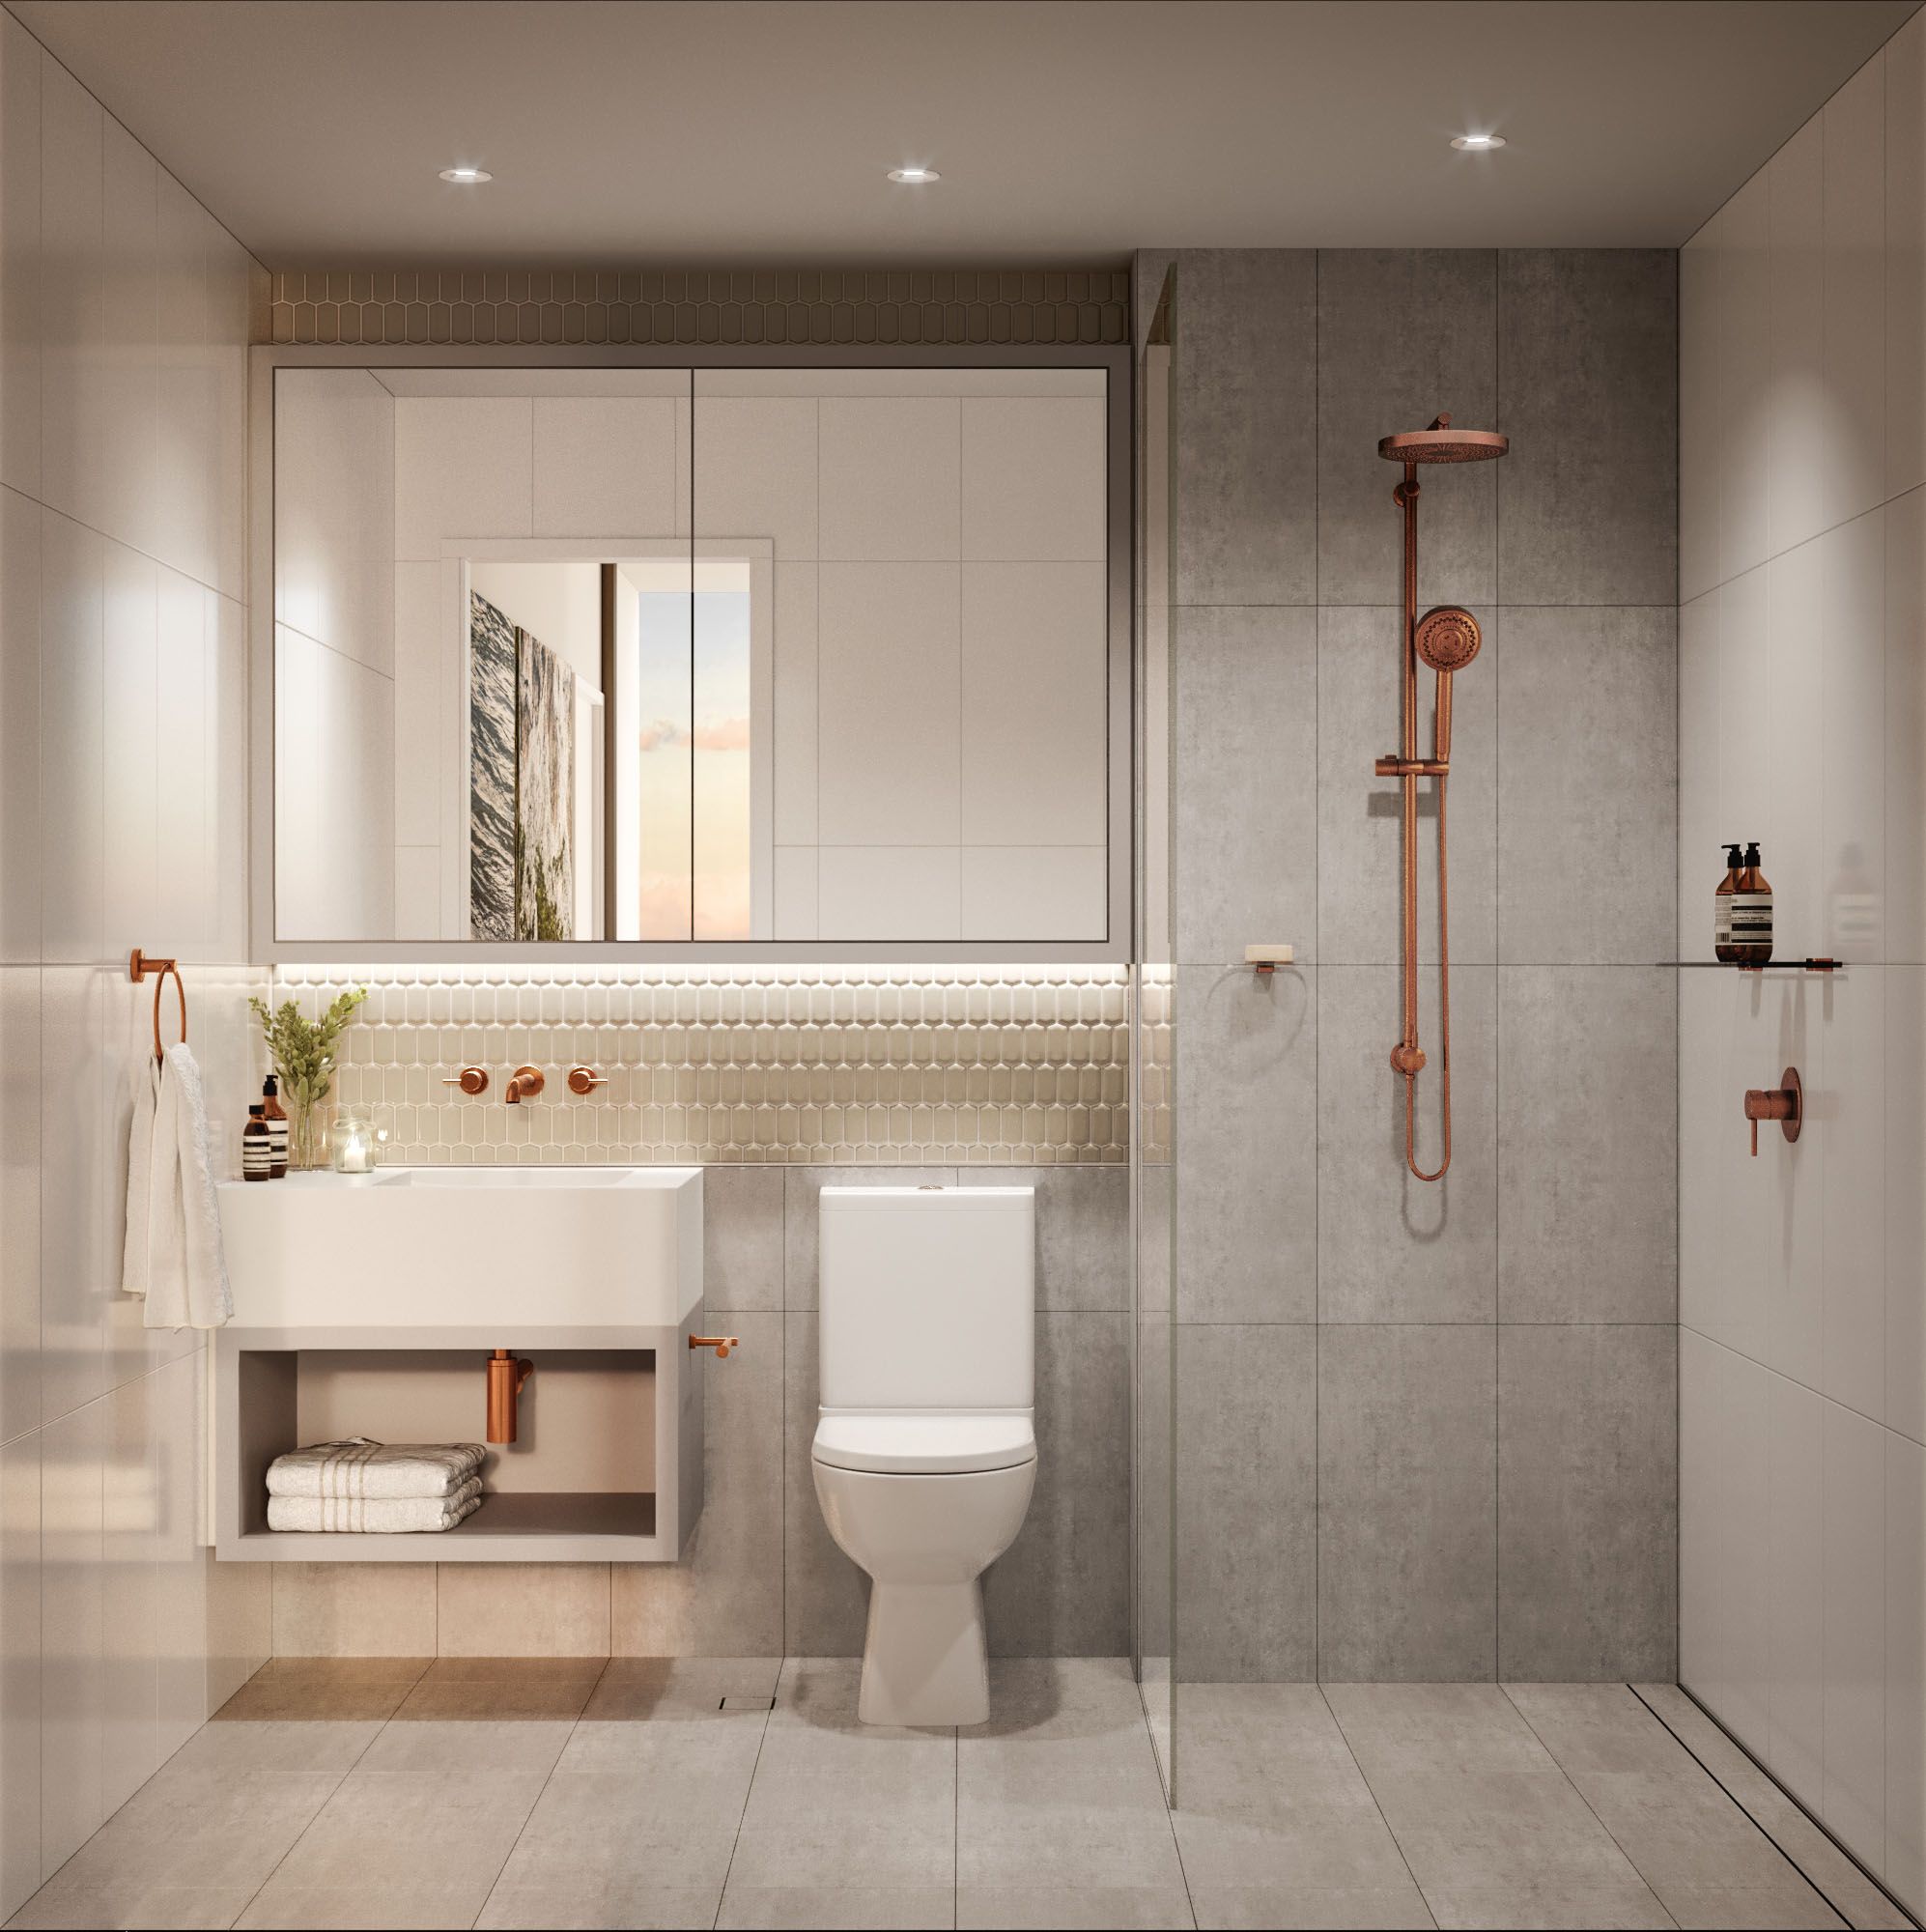 A modern, elegantly designed bathroom featuring neutral tones. The room showcases a large mirror with embedded lighting and a smaller inset window revealing a serene sunset. Below the mirror, a white countertop includes an undermount sink with stylish copper fixtures. Above the countertop, a textured fish-scale backsplash adds visual interest. To the right, a walk-in shower is equipped with a copper rain showerhead and matching controls, complemented by large, light-gray tiles that line the wall. The bathroom also boasts a floating vanity with a shelf below for storing towels and a wall-mounted toilet. Accents of plants and toiletries enhance the serene ambiance of the space. The flooring, consistent with the shower walls, provides a seamless look, completing the sophisticated aesthetic of the room.